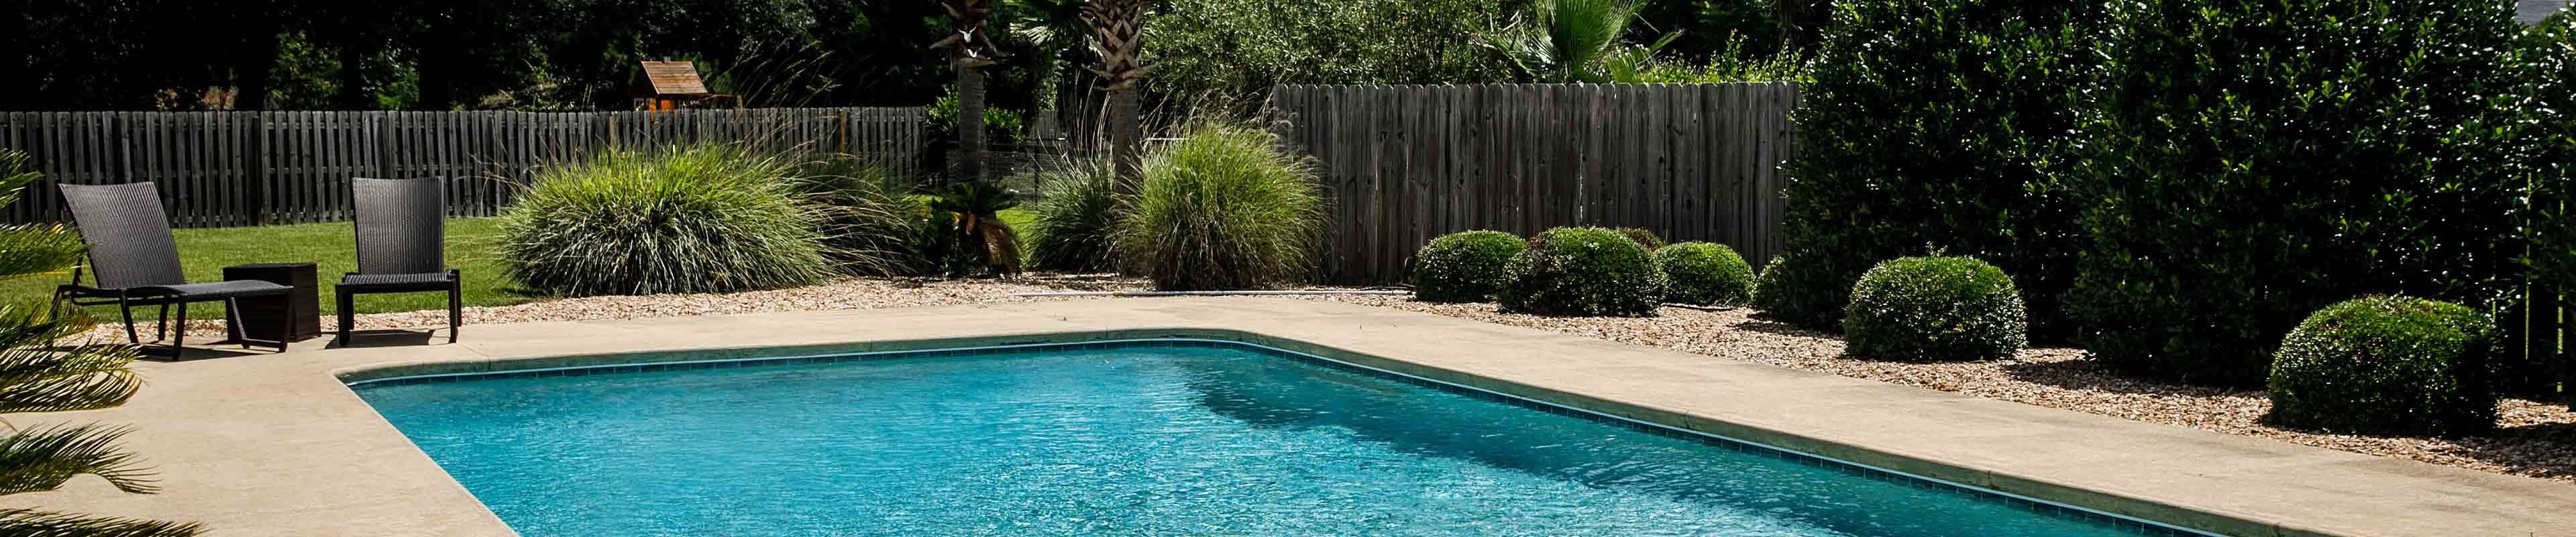 Swimming pool in a backyard with a fence.